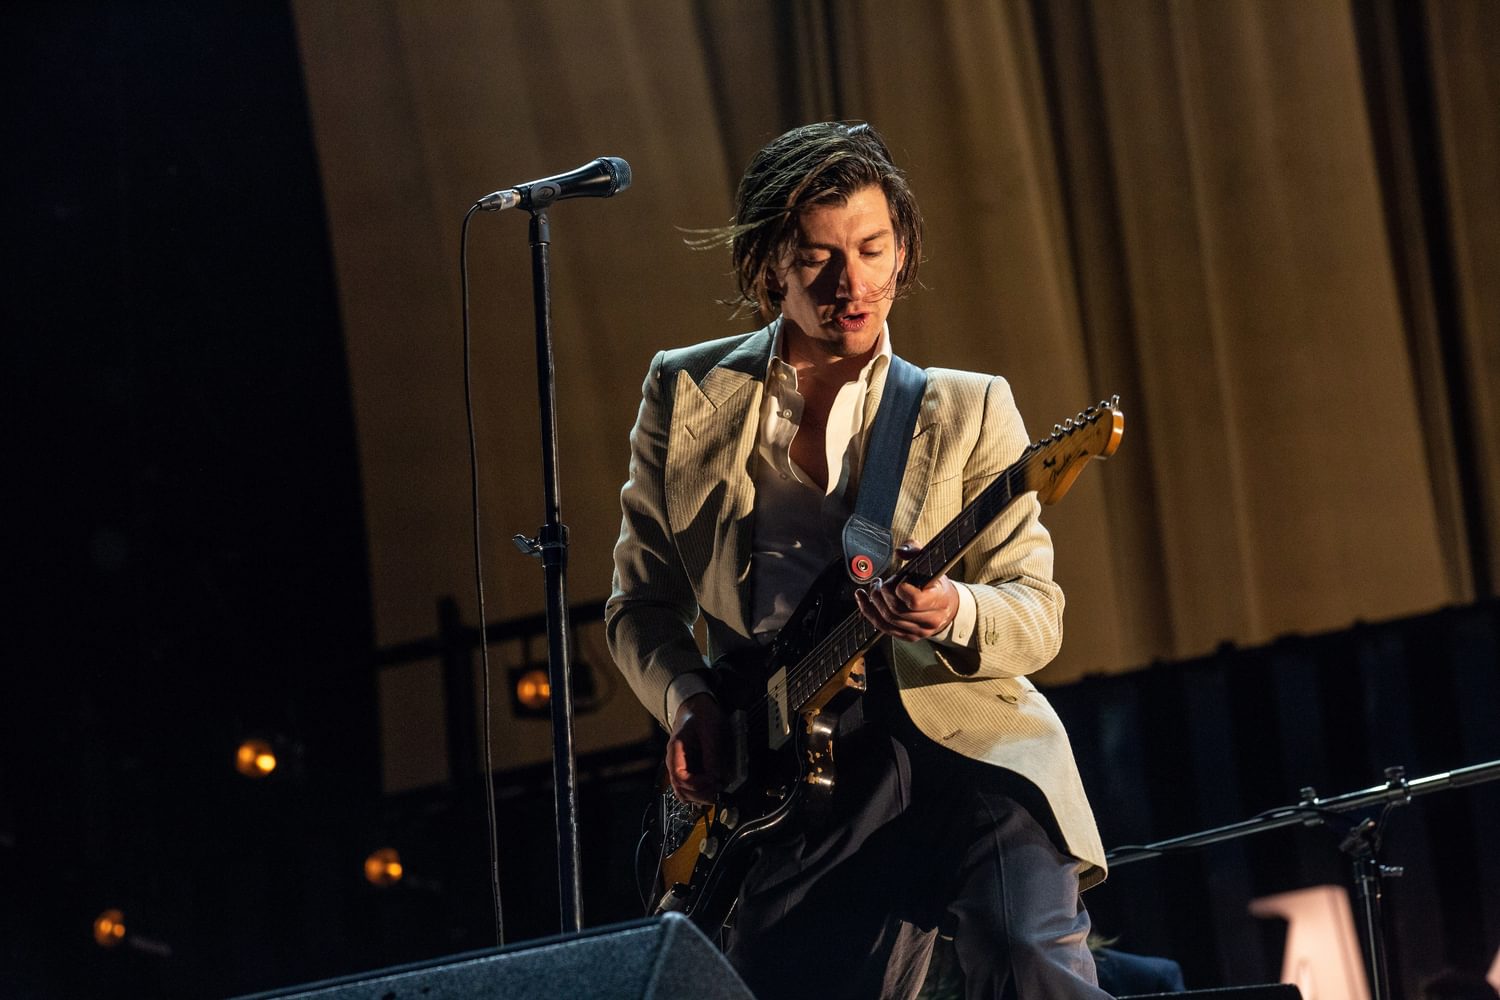 Arctic Monkeys cover The Strokes at New York show